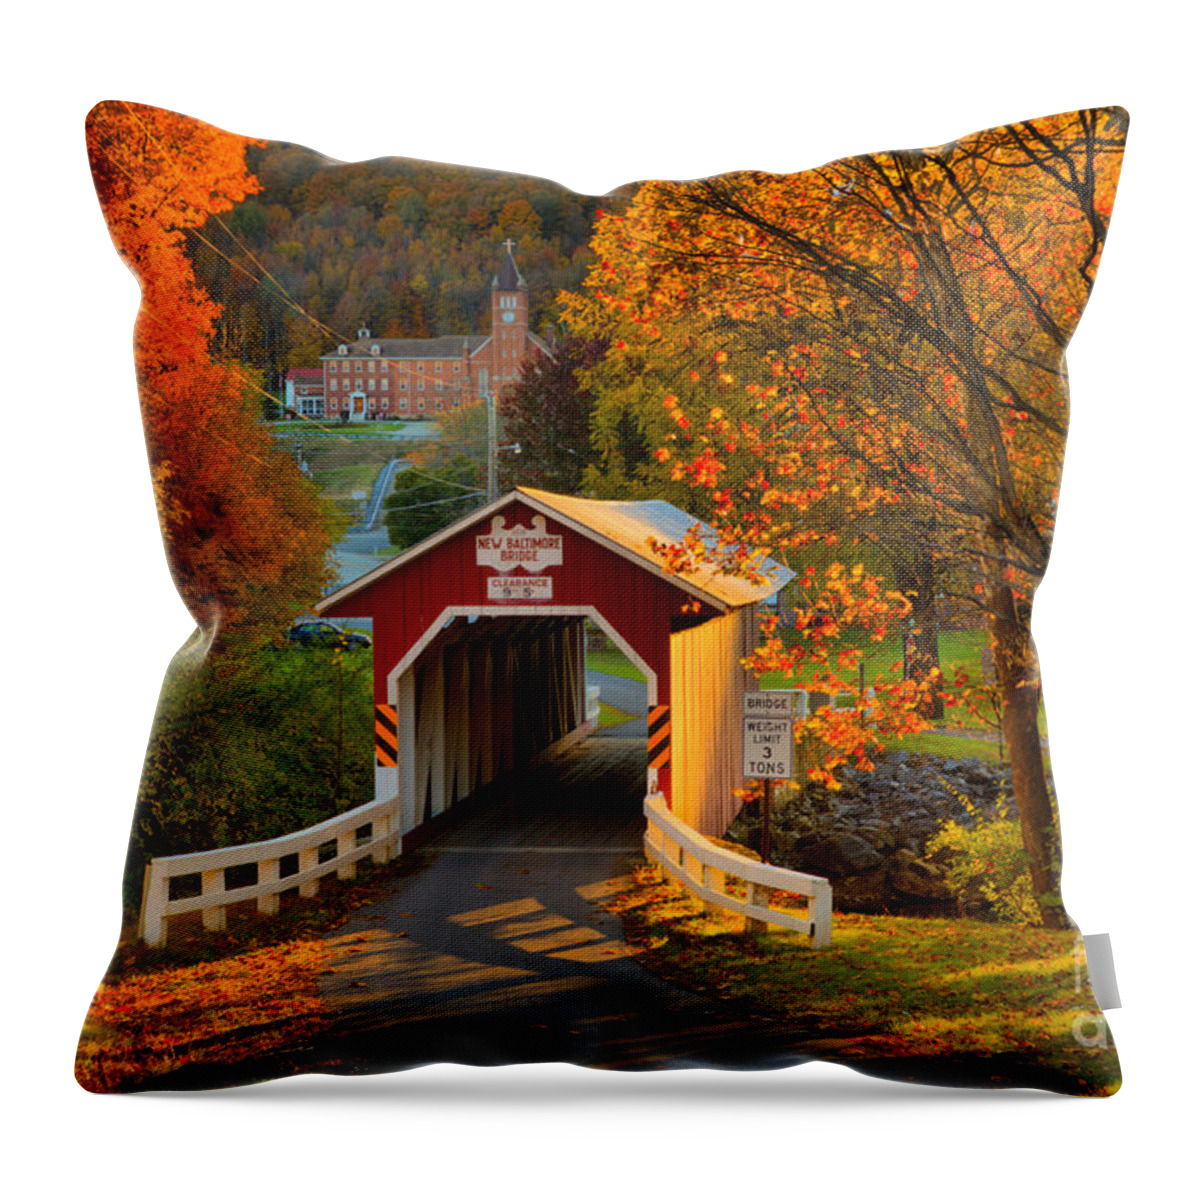 New Baltimore Throw Pillow featuring the photograph New Baltimore Covered Bridge Fall Landscape by Adam Jewell